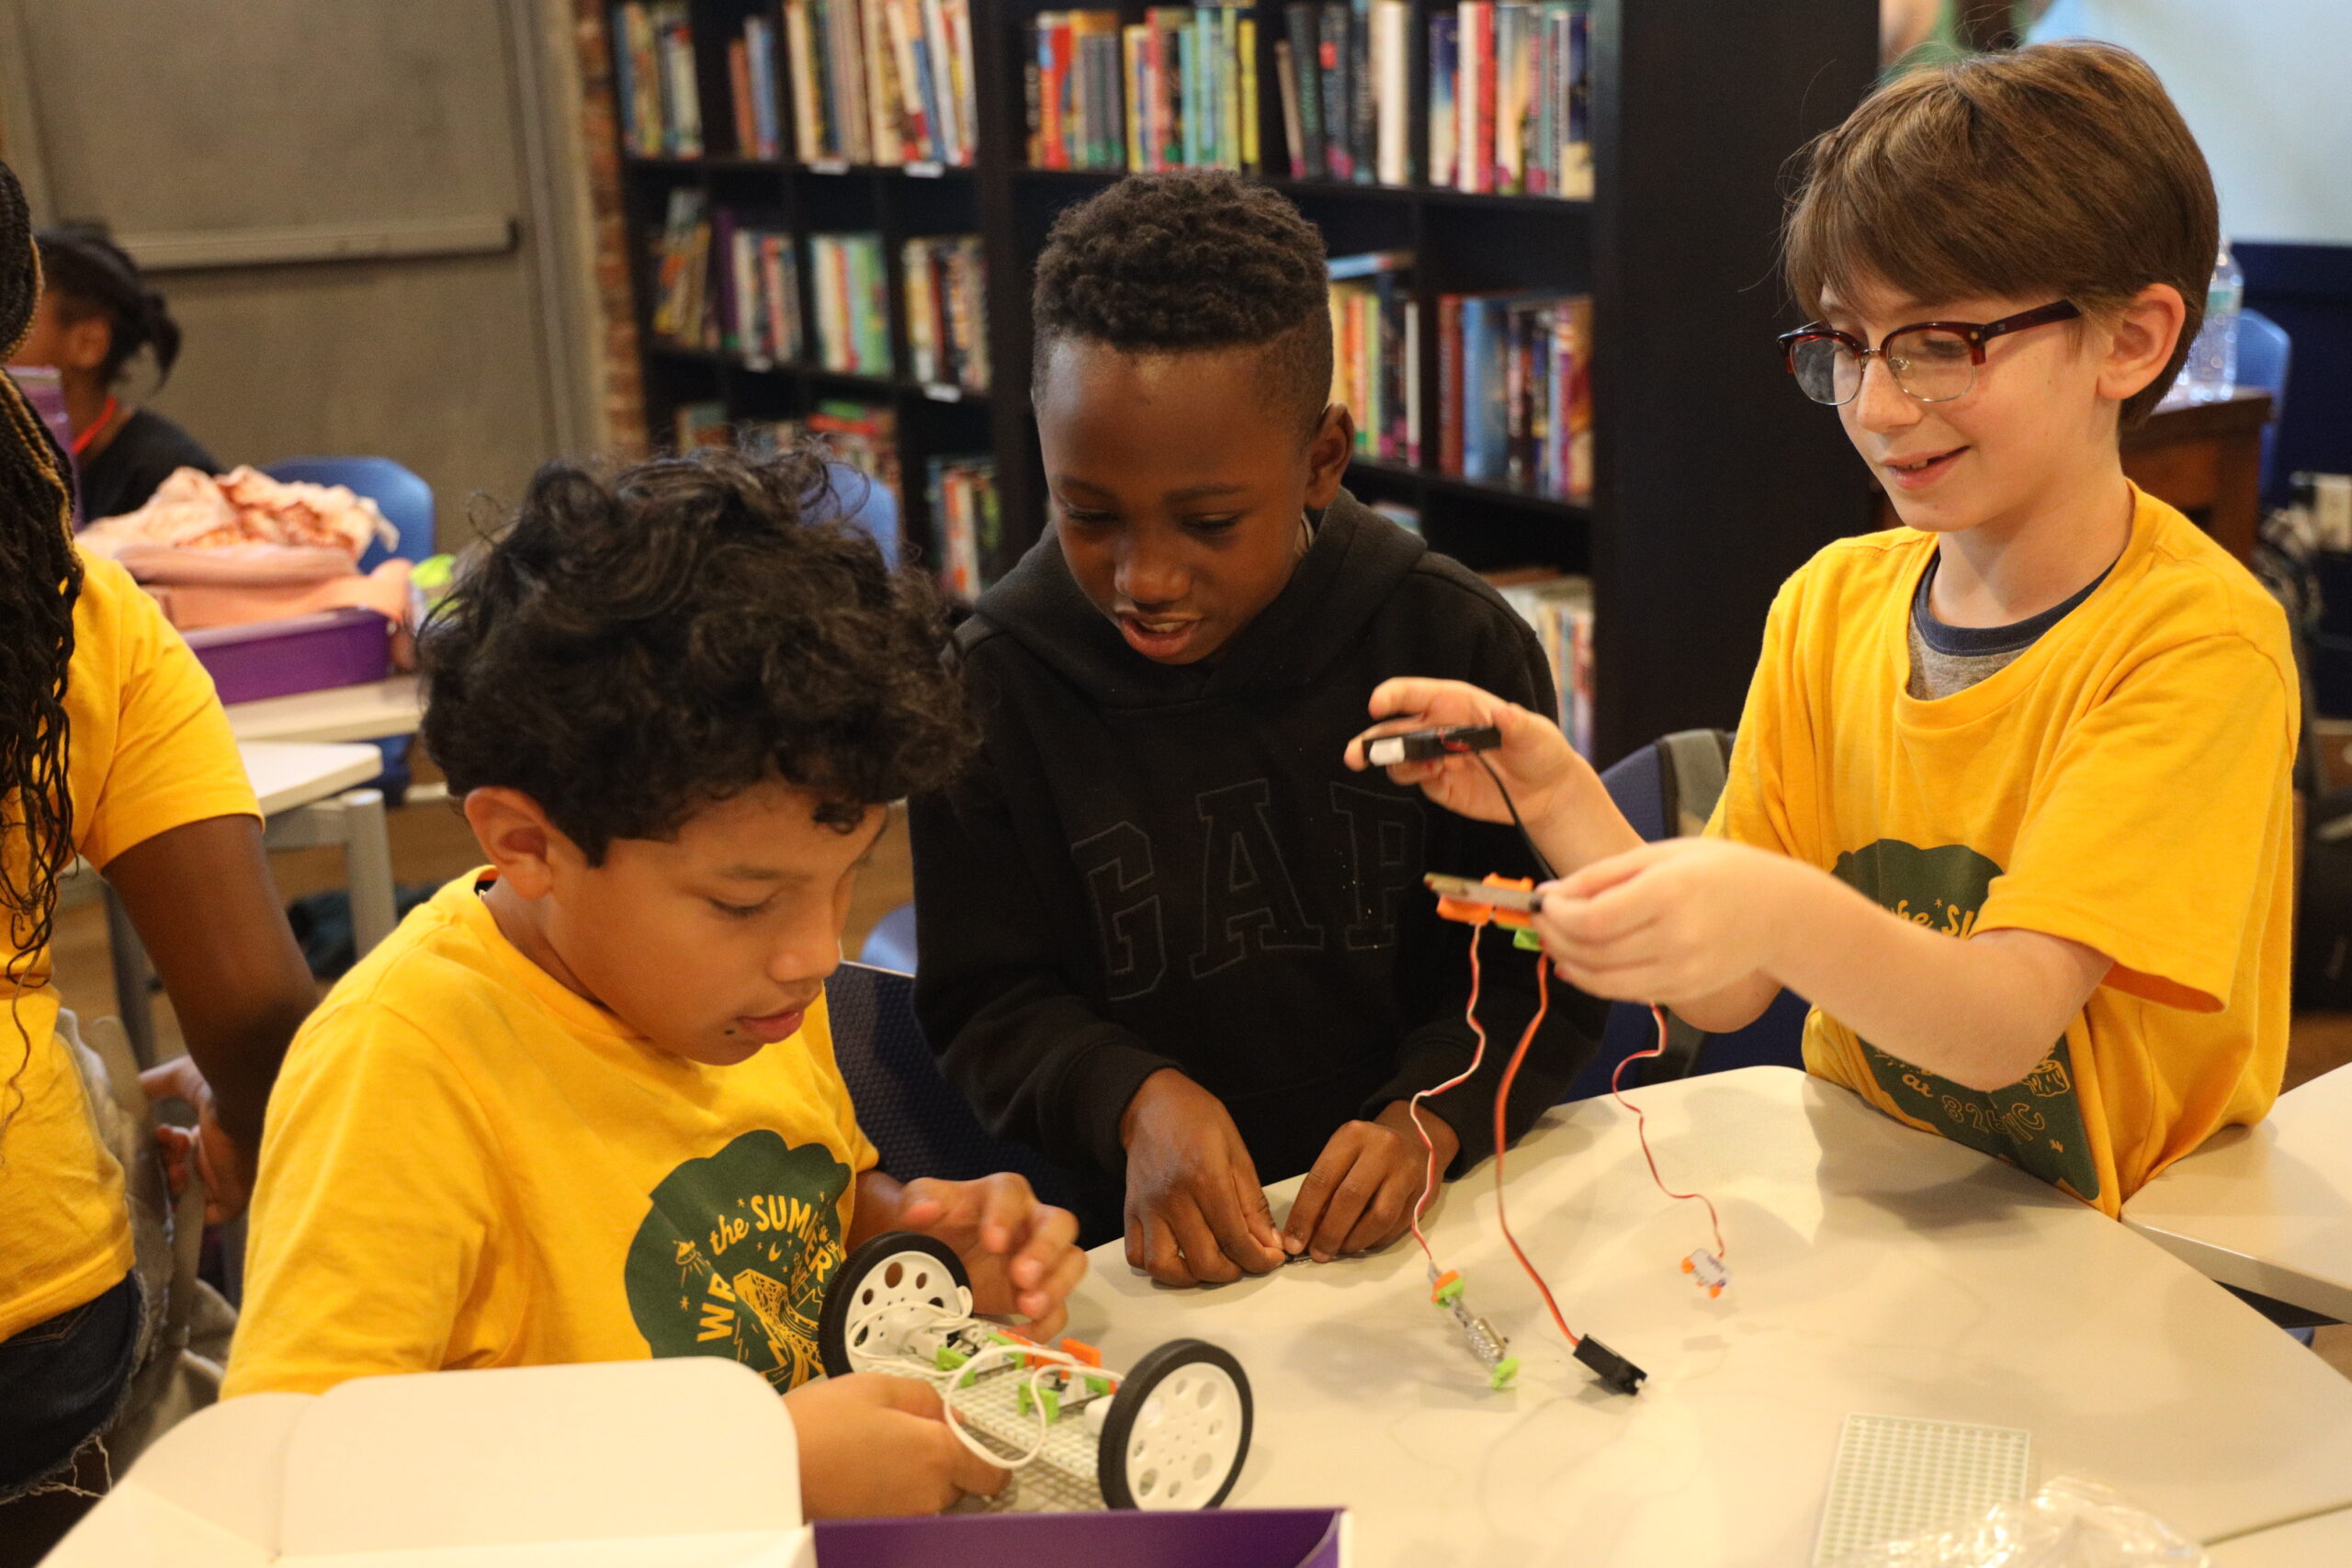 Students collaborate on a circuitry project using Little Bits during the summer Sci-Fi & Circuitry workshop.